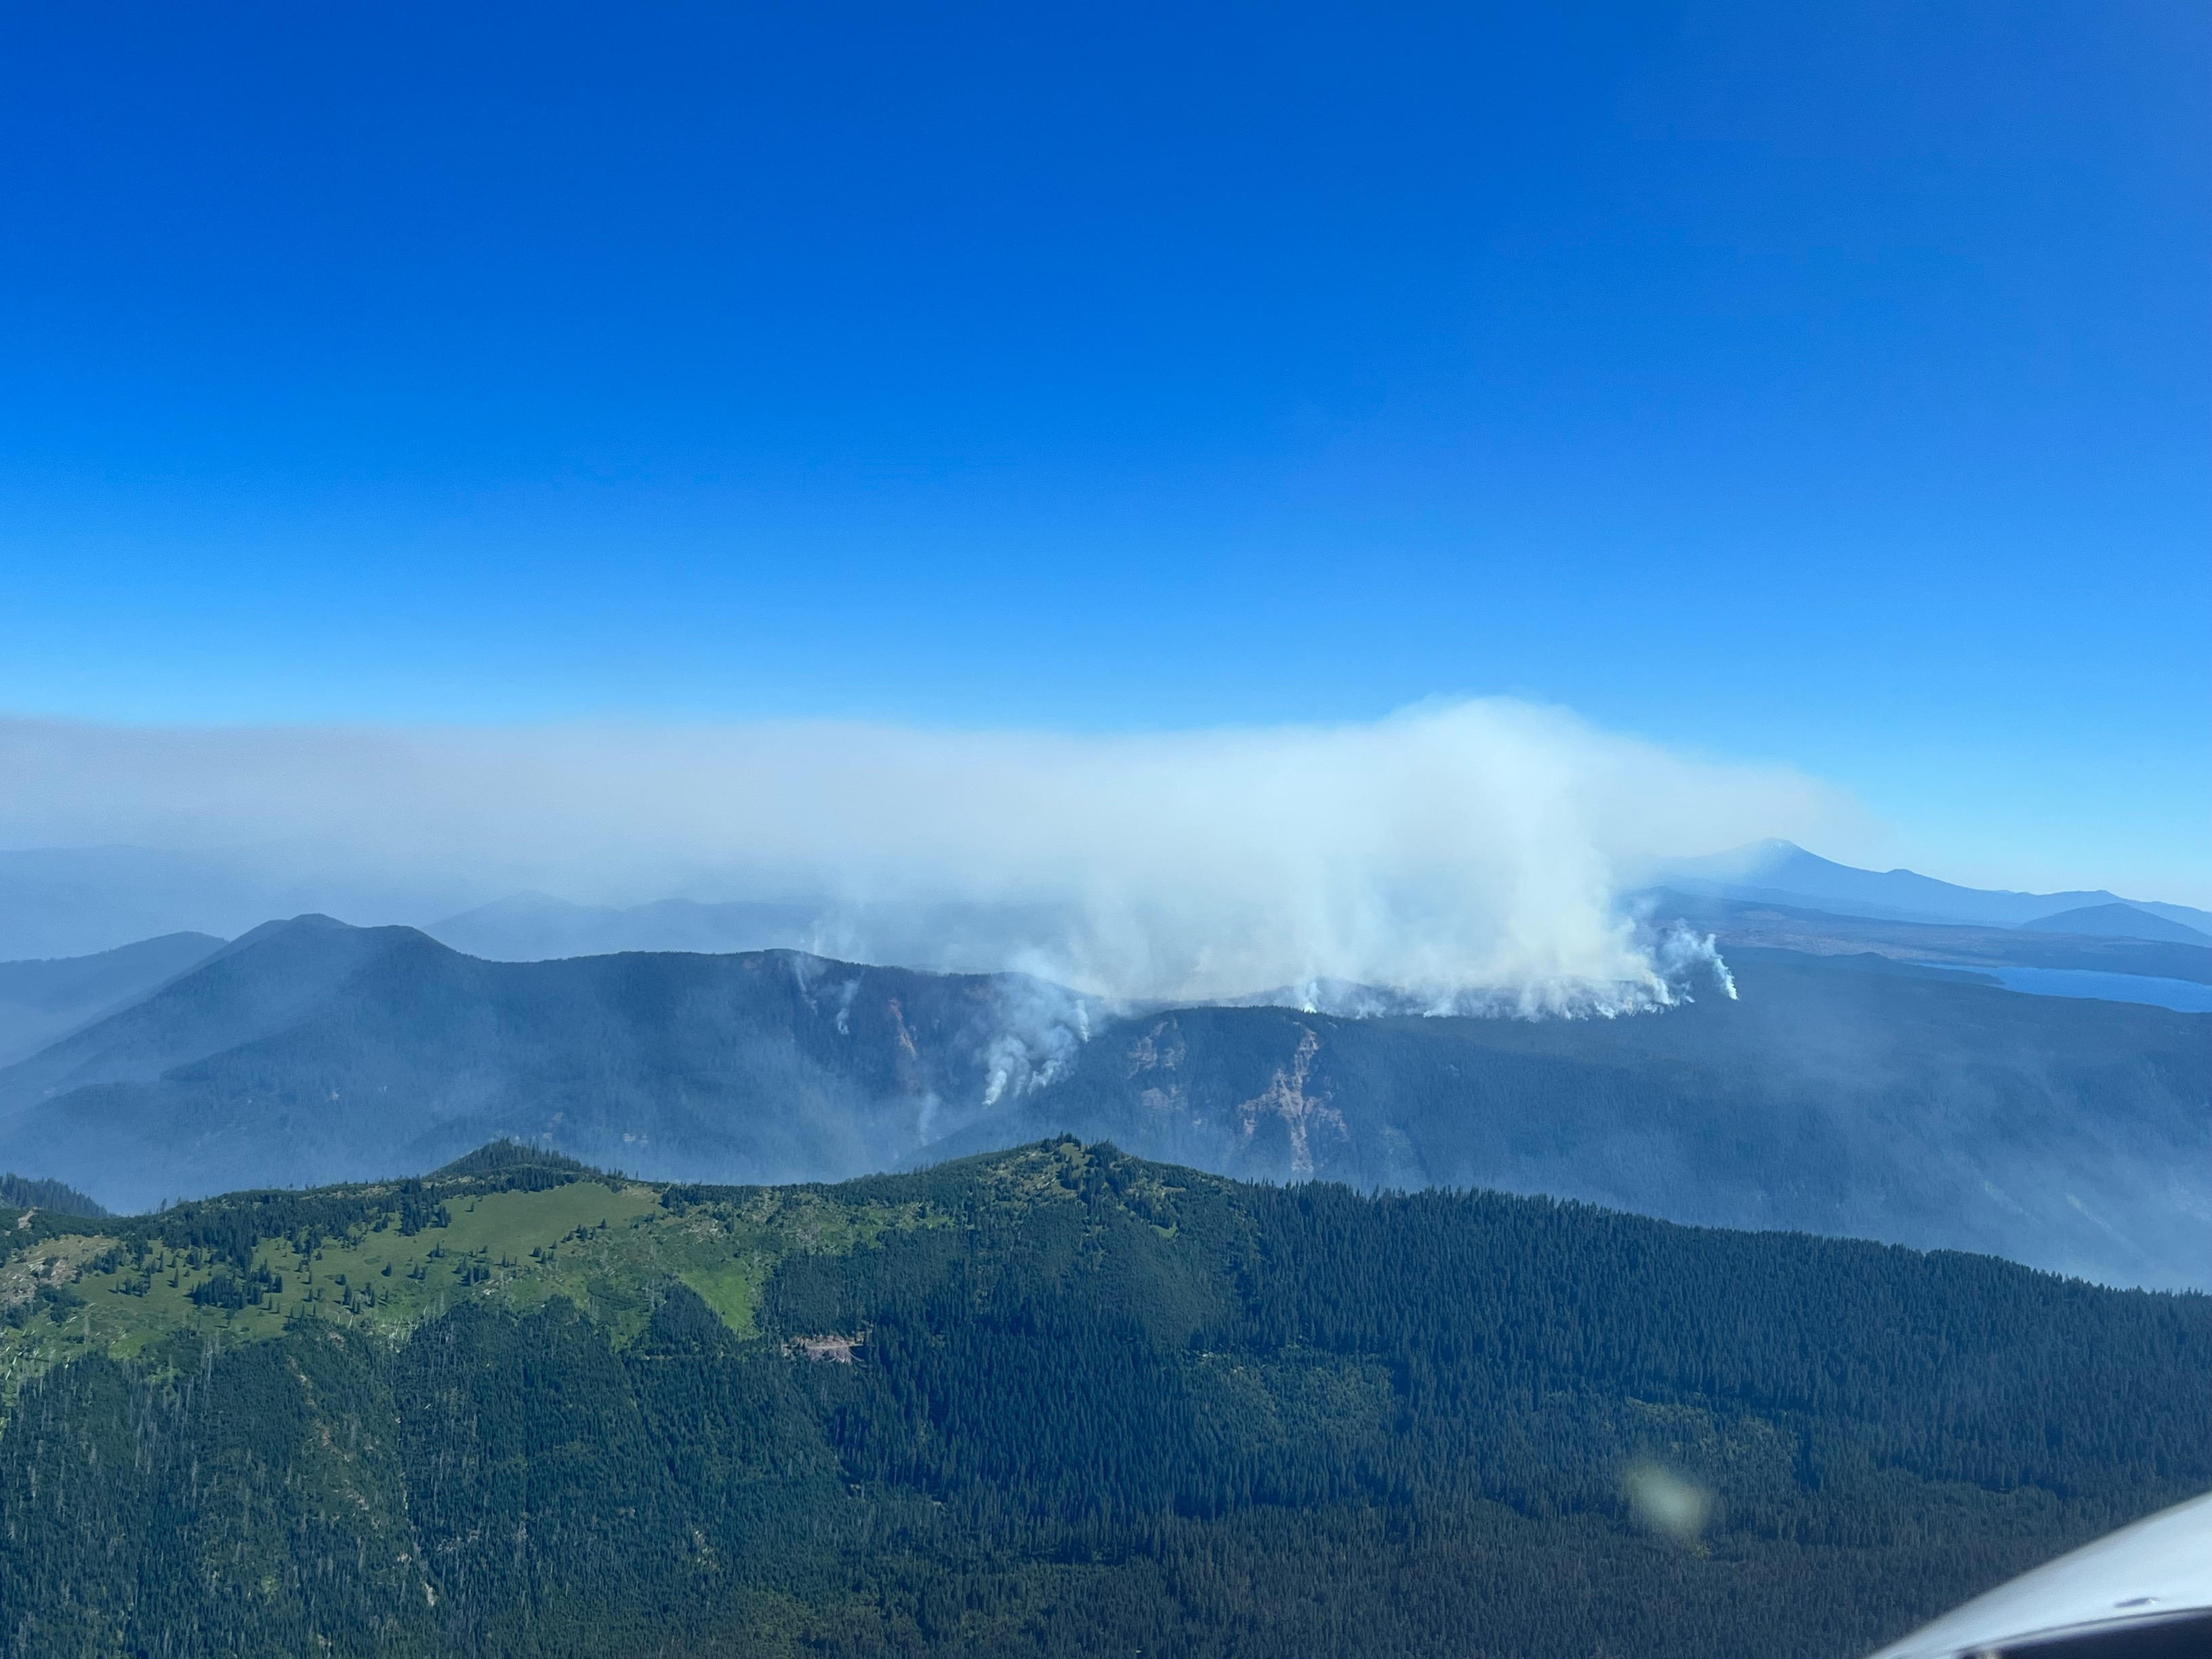 View of the smoke of Cedar Creek Fire from the south at approximately 11am on August 6. Smoke is dispersed across the fire area surrounded by dense timber. No column is visible.